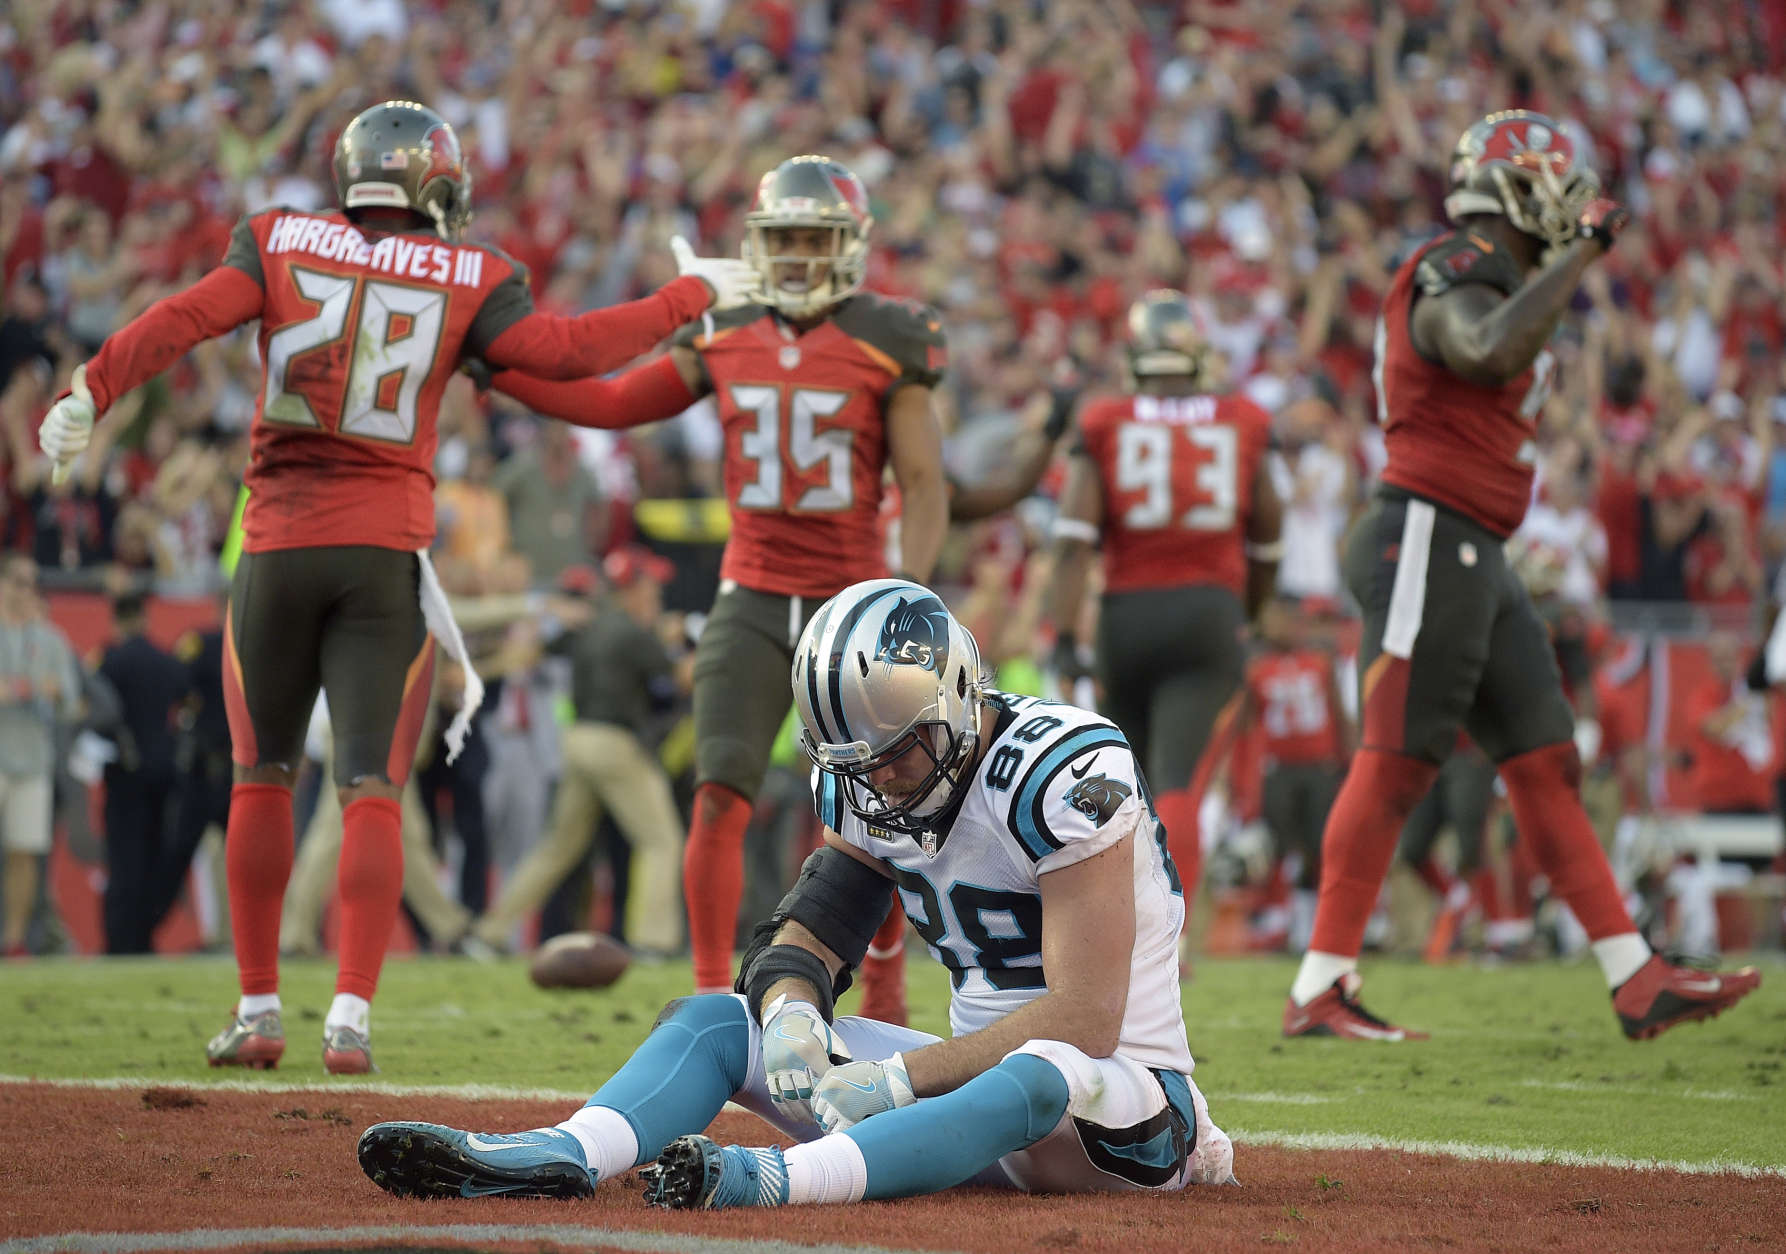 Carolina Panthers tight end Greg Olsen (88) sits dejected in the end zone as the Tampa Bay Buccaneers celebrate after the Panthers failed on a 2-point conversion during the fourth quarter of an NFL football game Sunday, Jan. 1, 2017, in Tampa, Fla. The Buccaneers won the game 17-16. (AP Photo/Phelan M. Ebenhack)